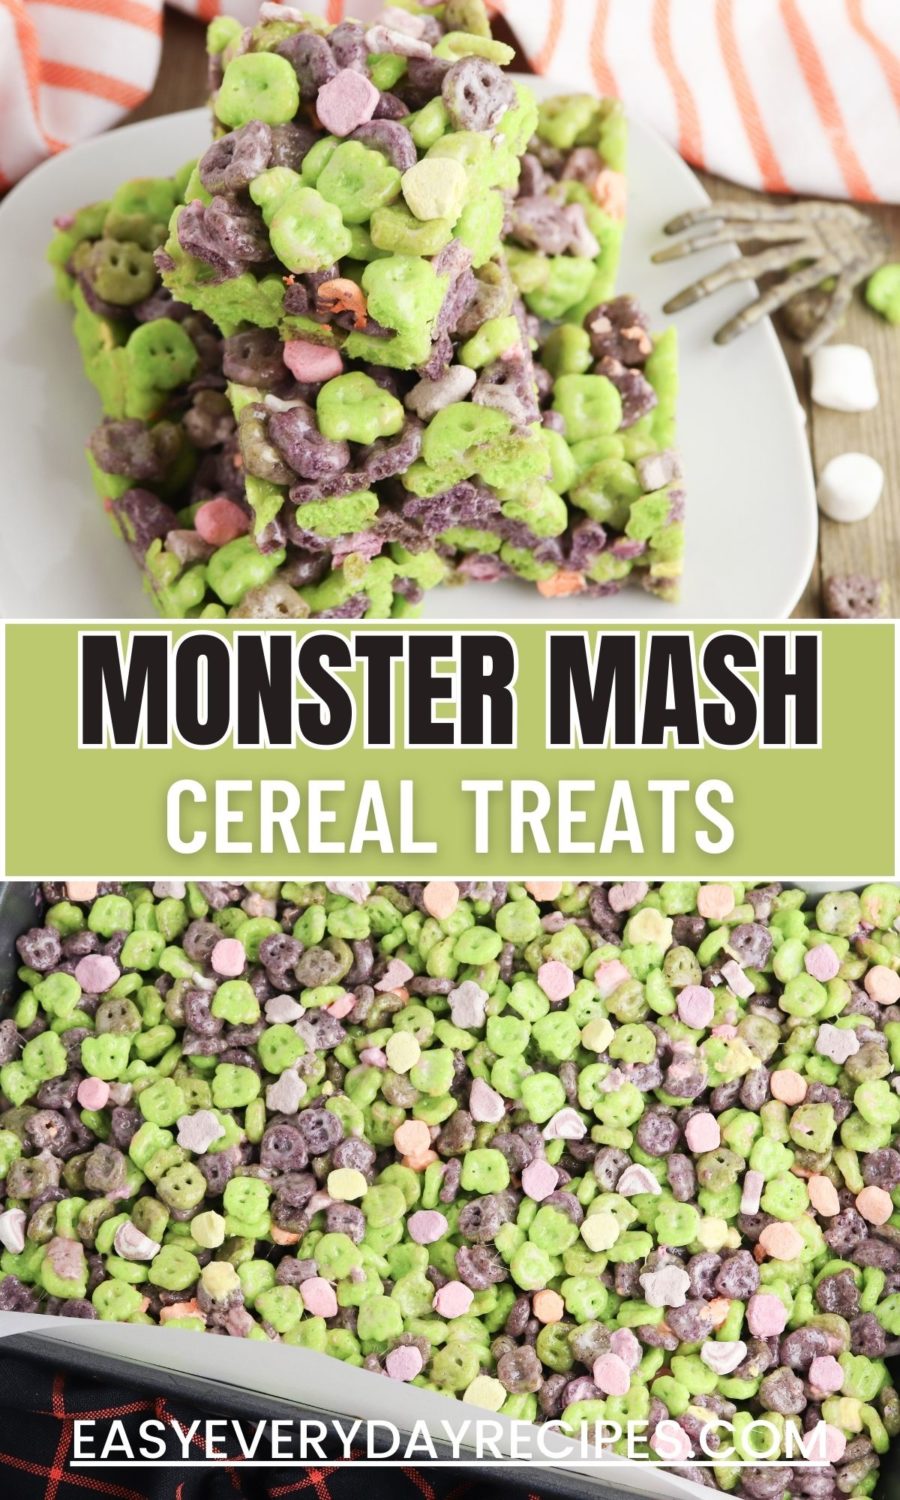 Monster mash cereal treats on a plate.